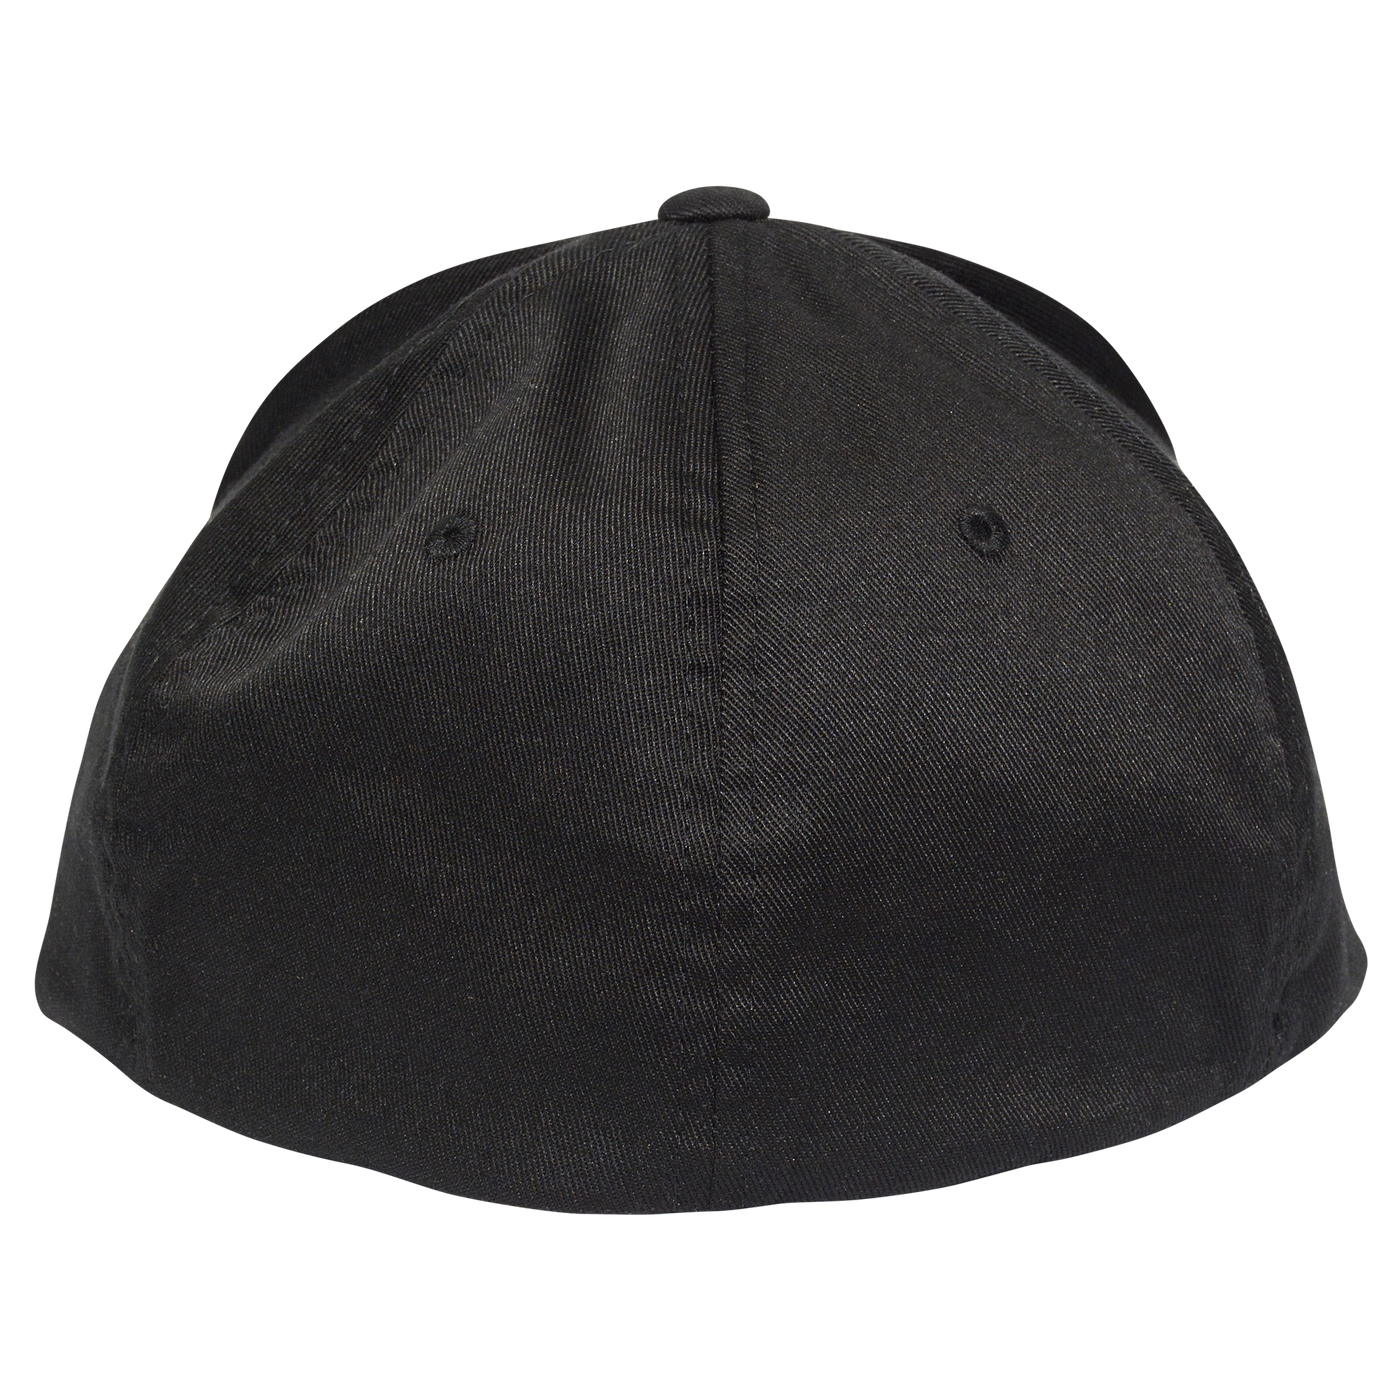 BW- Leather Patch (Side-Brand) Curved Bill FlexFit Hat